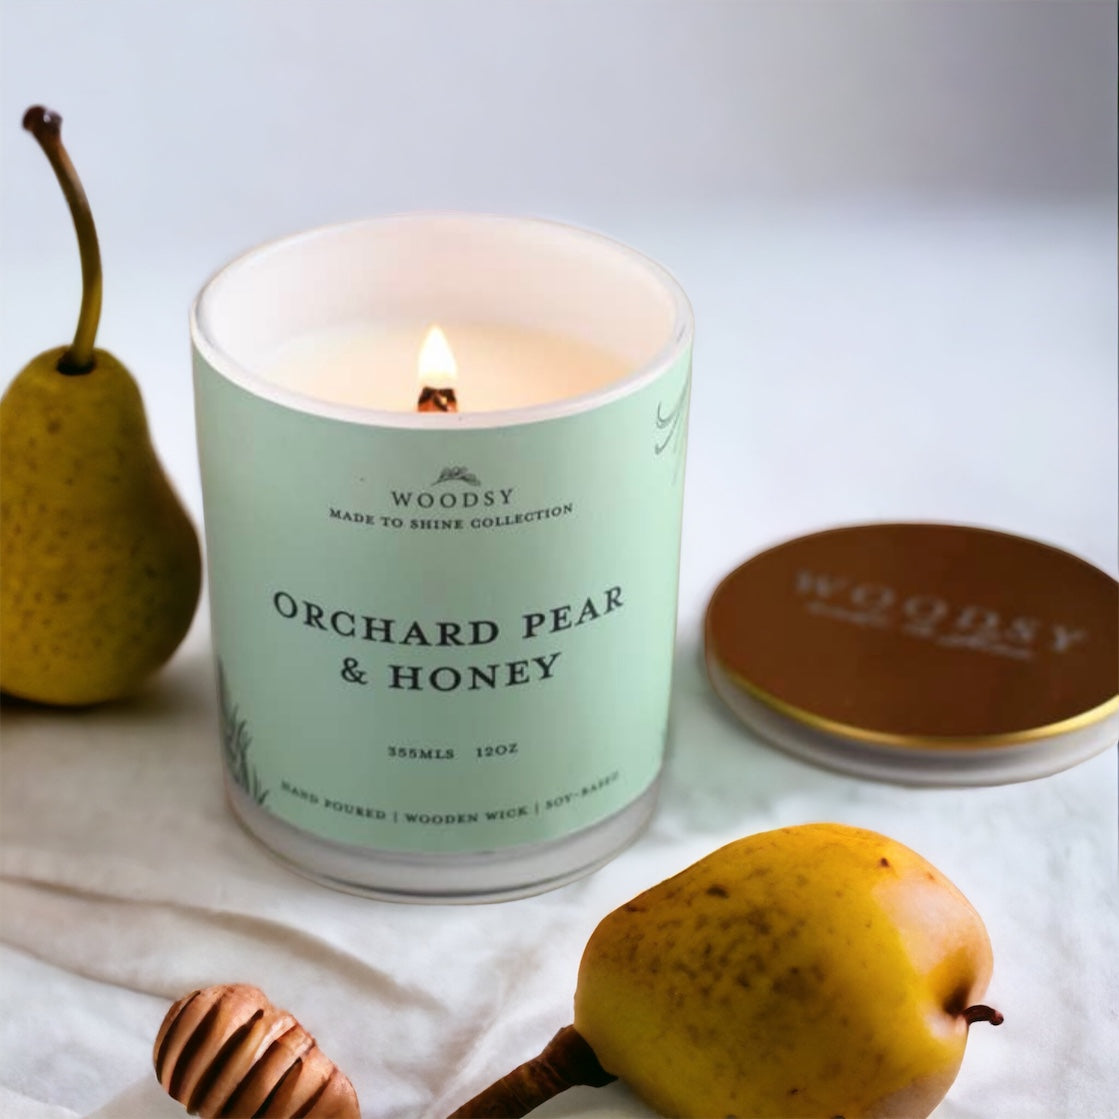 Orchard Pear & Honey/ Gold Lid Jar-12oz/ Wooden wick/ Pure Soy Candle